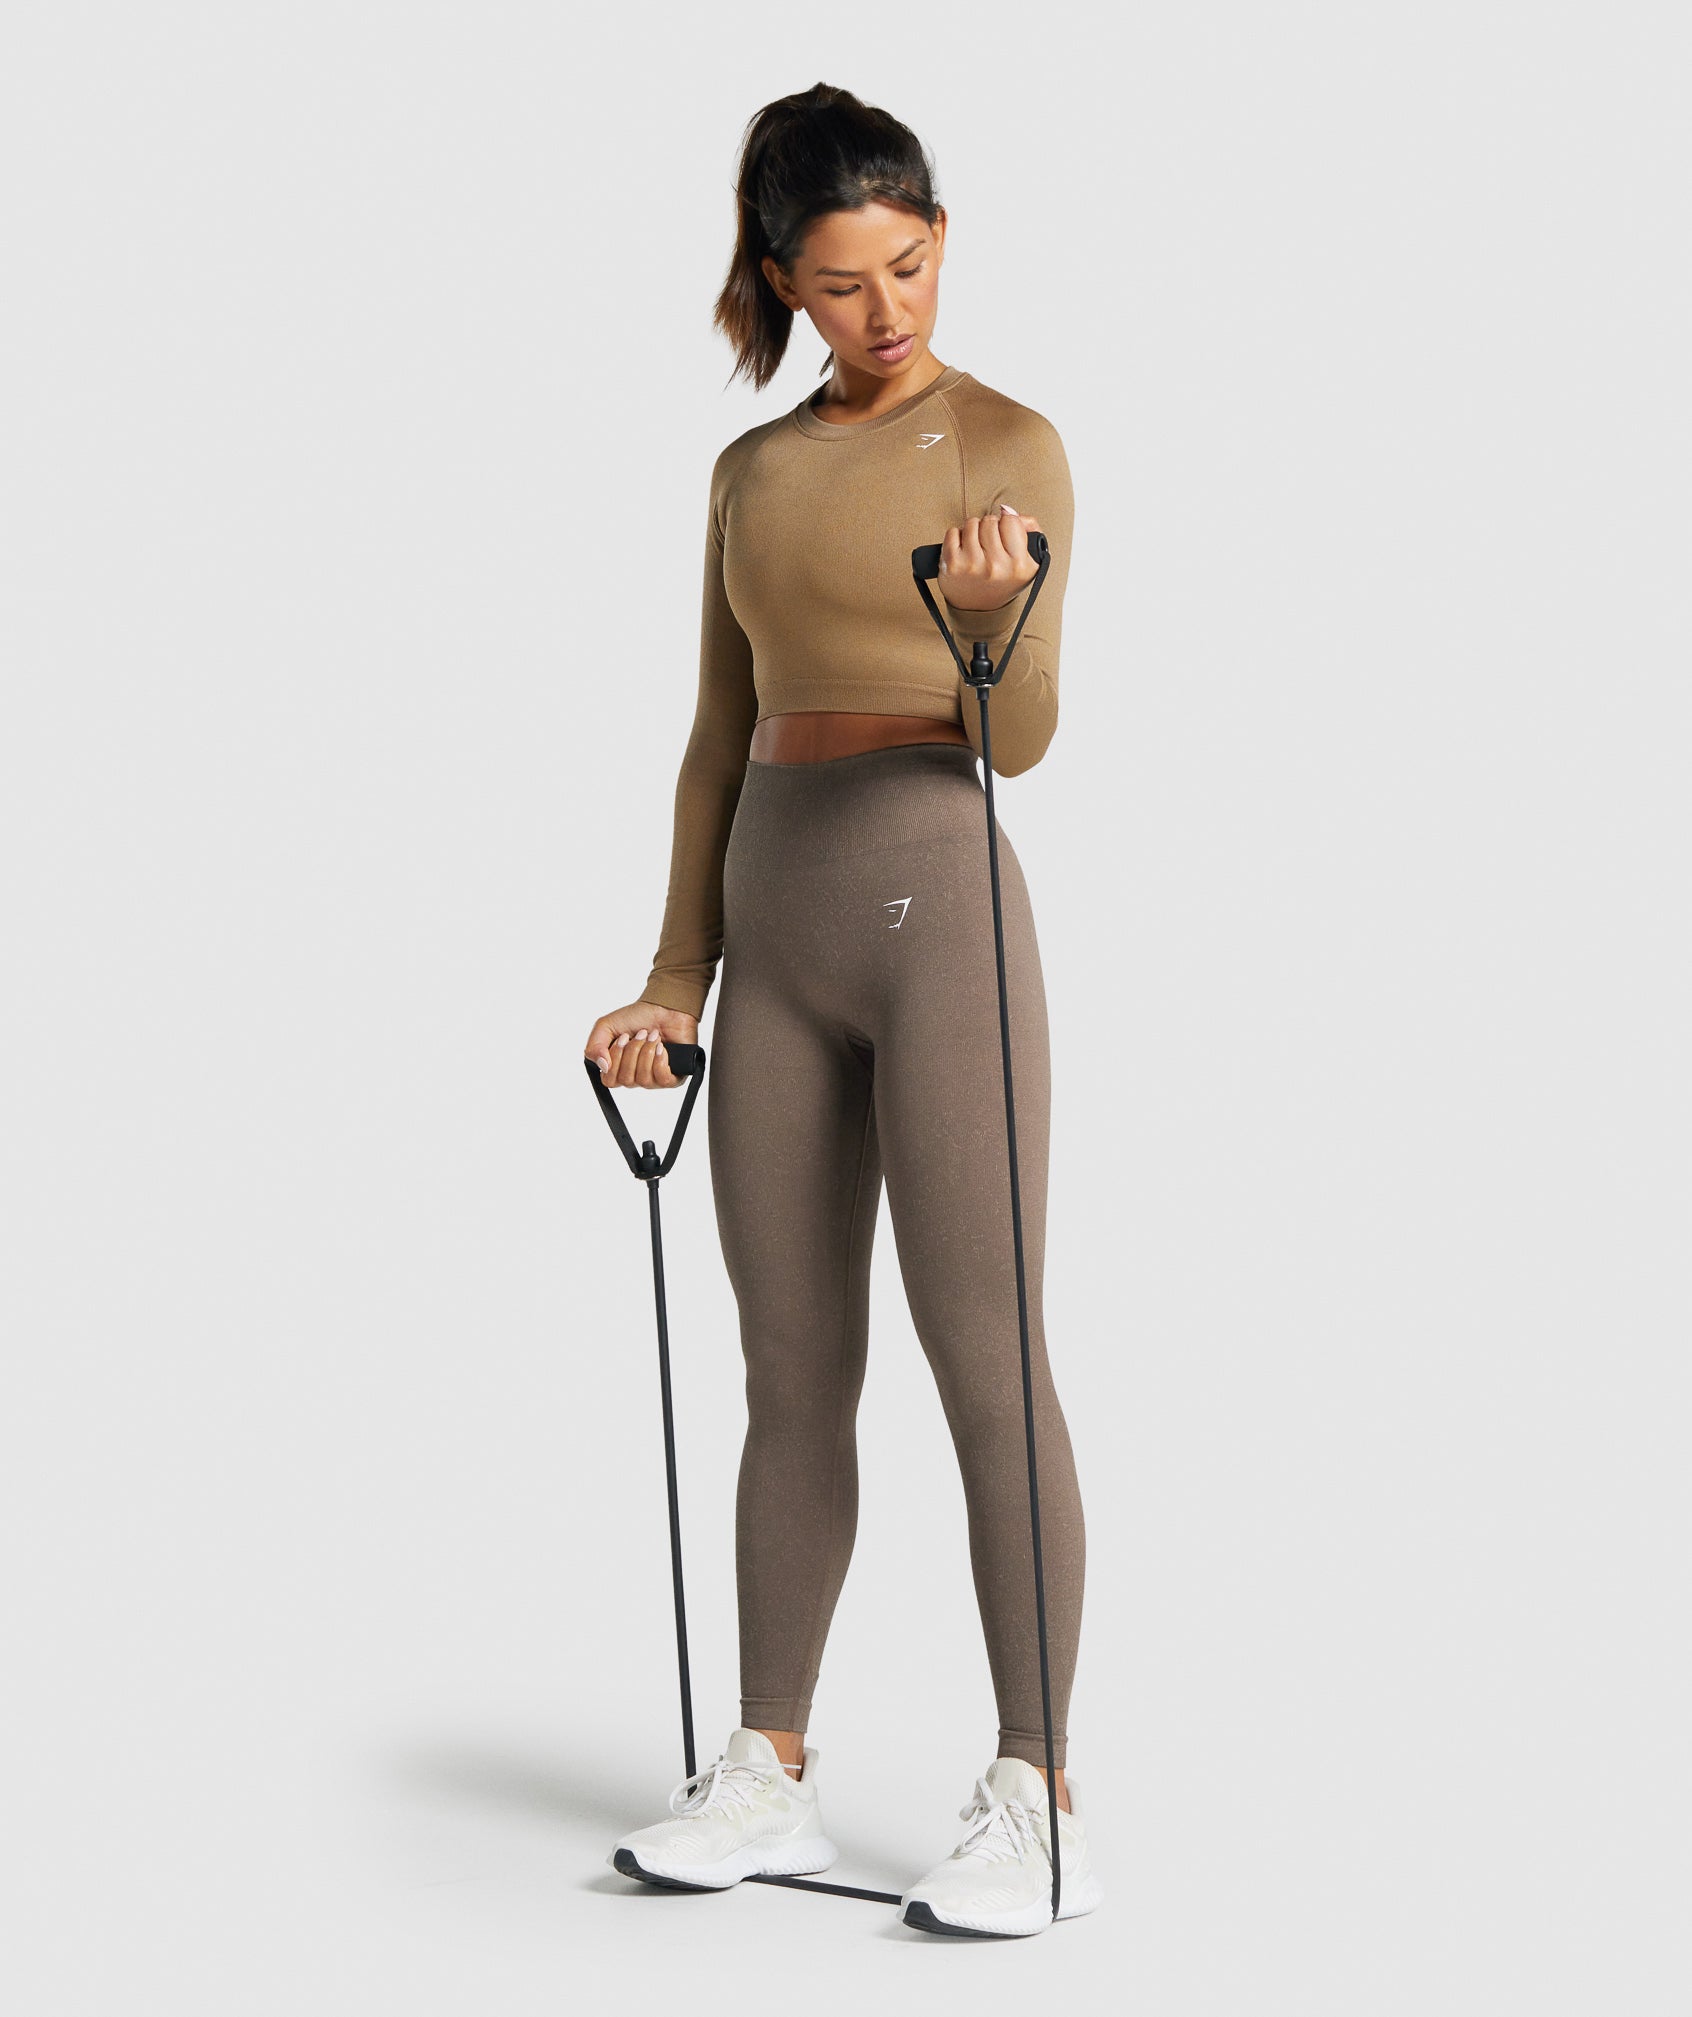 Adapt Fleck Seamless Long Sleeve Crop Top in Mineral | Light Brown - view 4